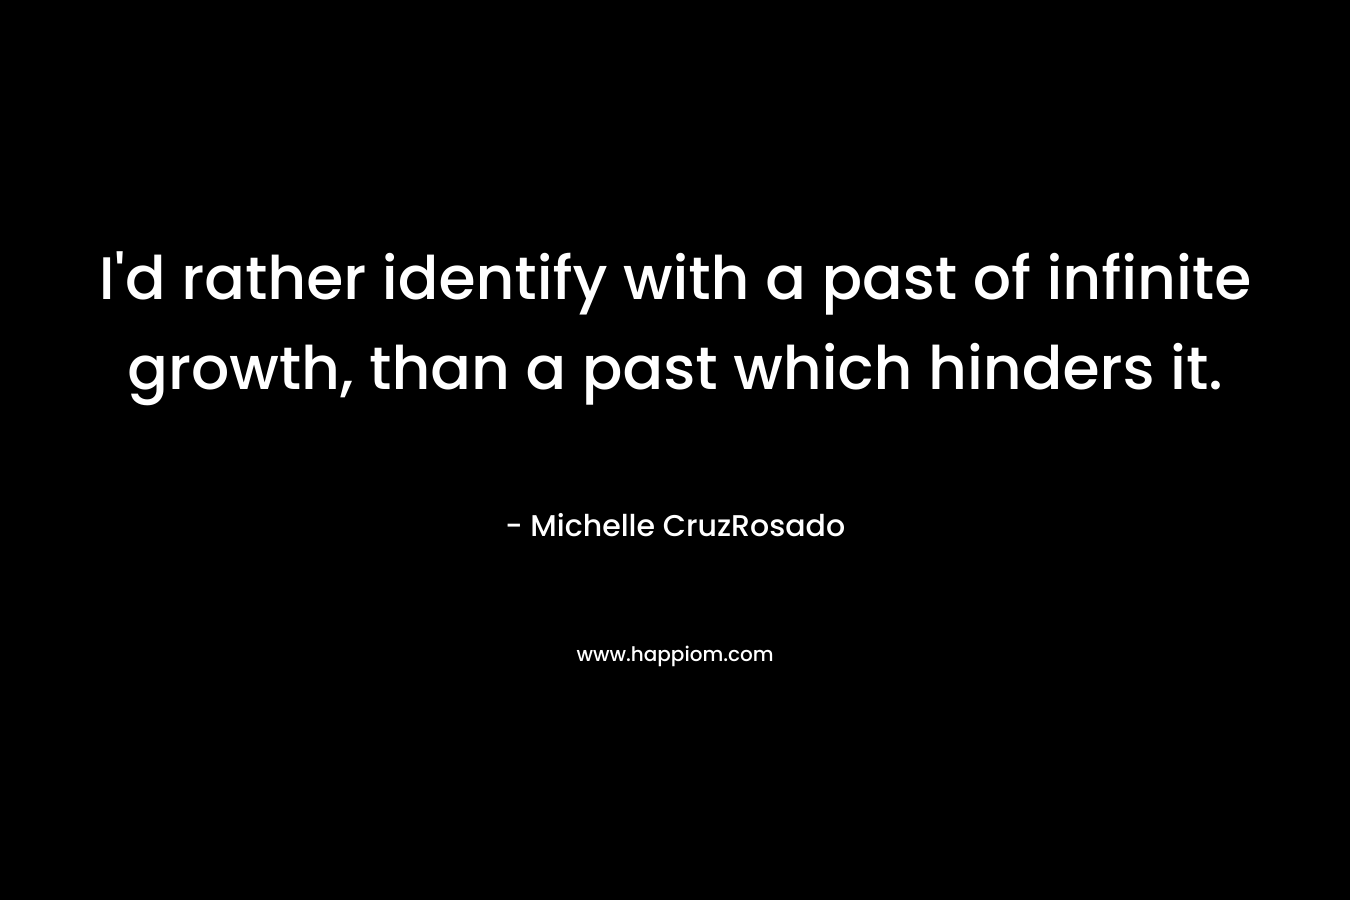 I’d rather identify with a past of infinite growth, than a past which hinders it. – Michelle CruzRosado